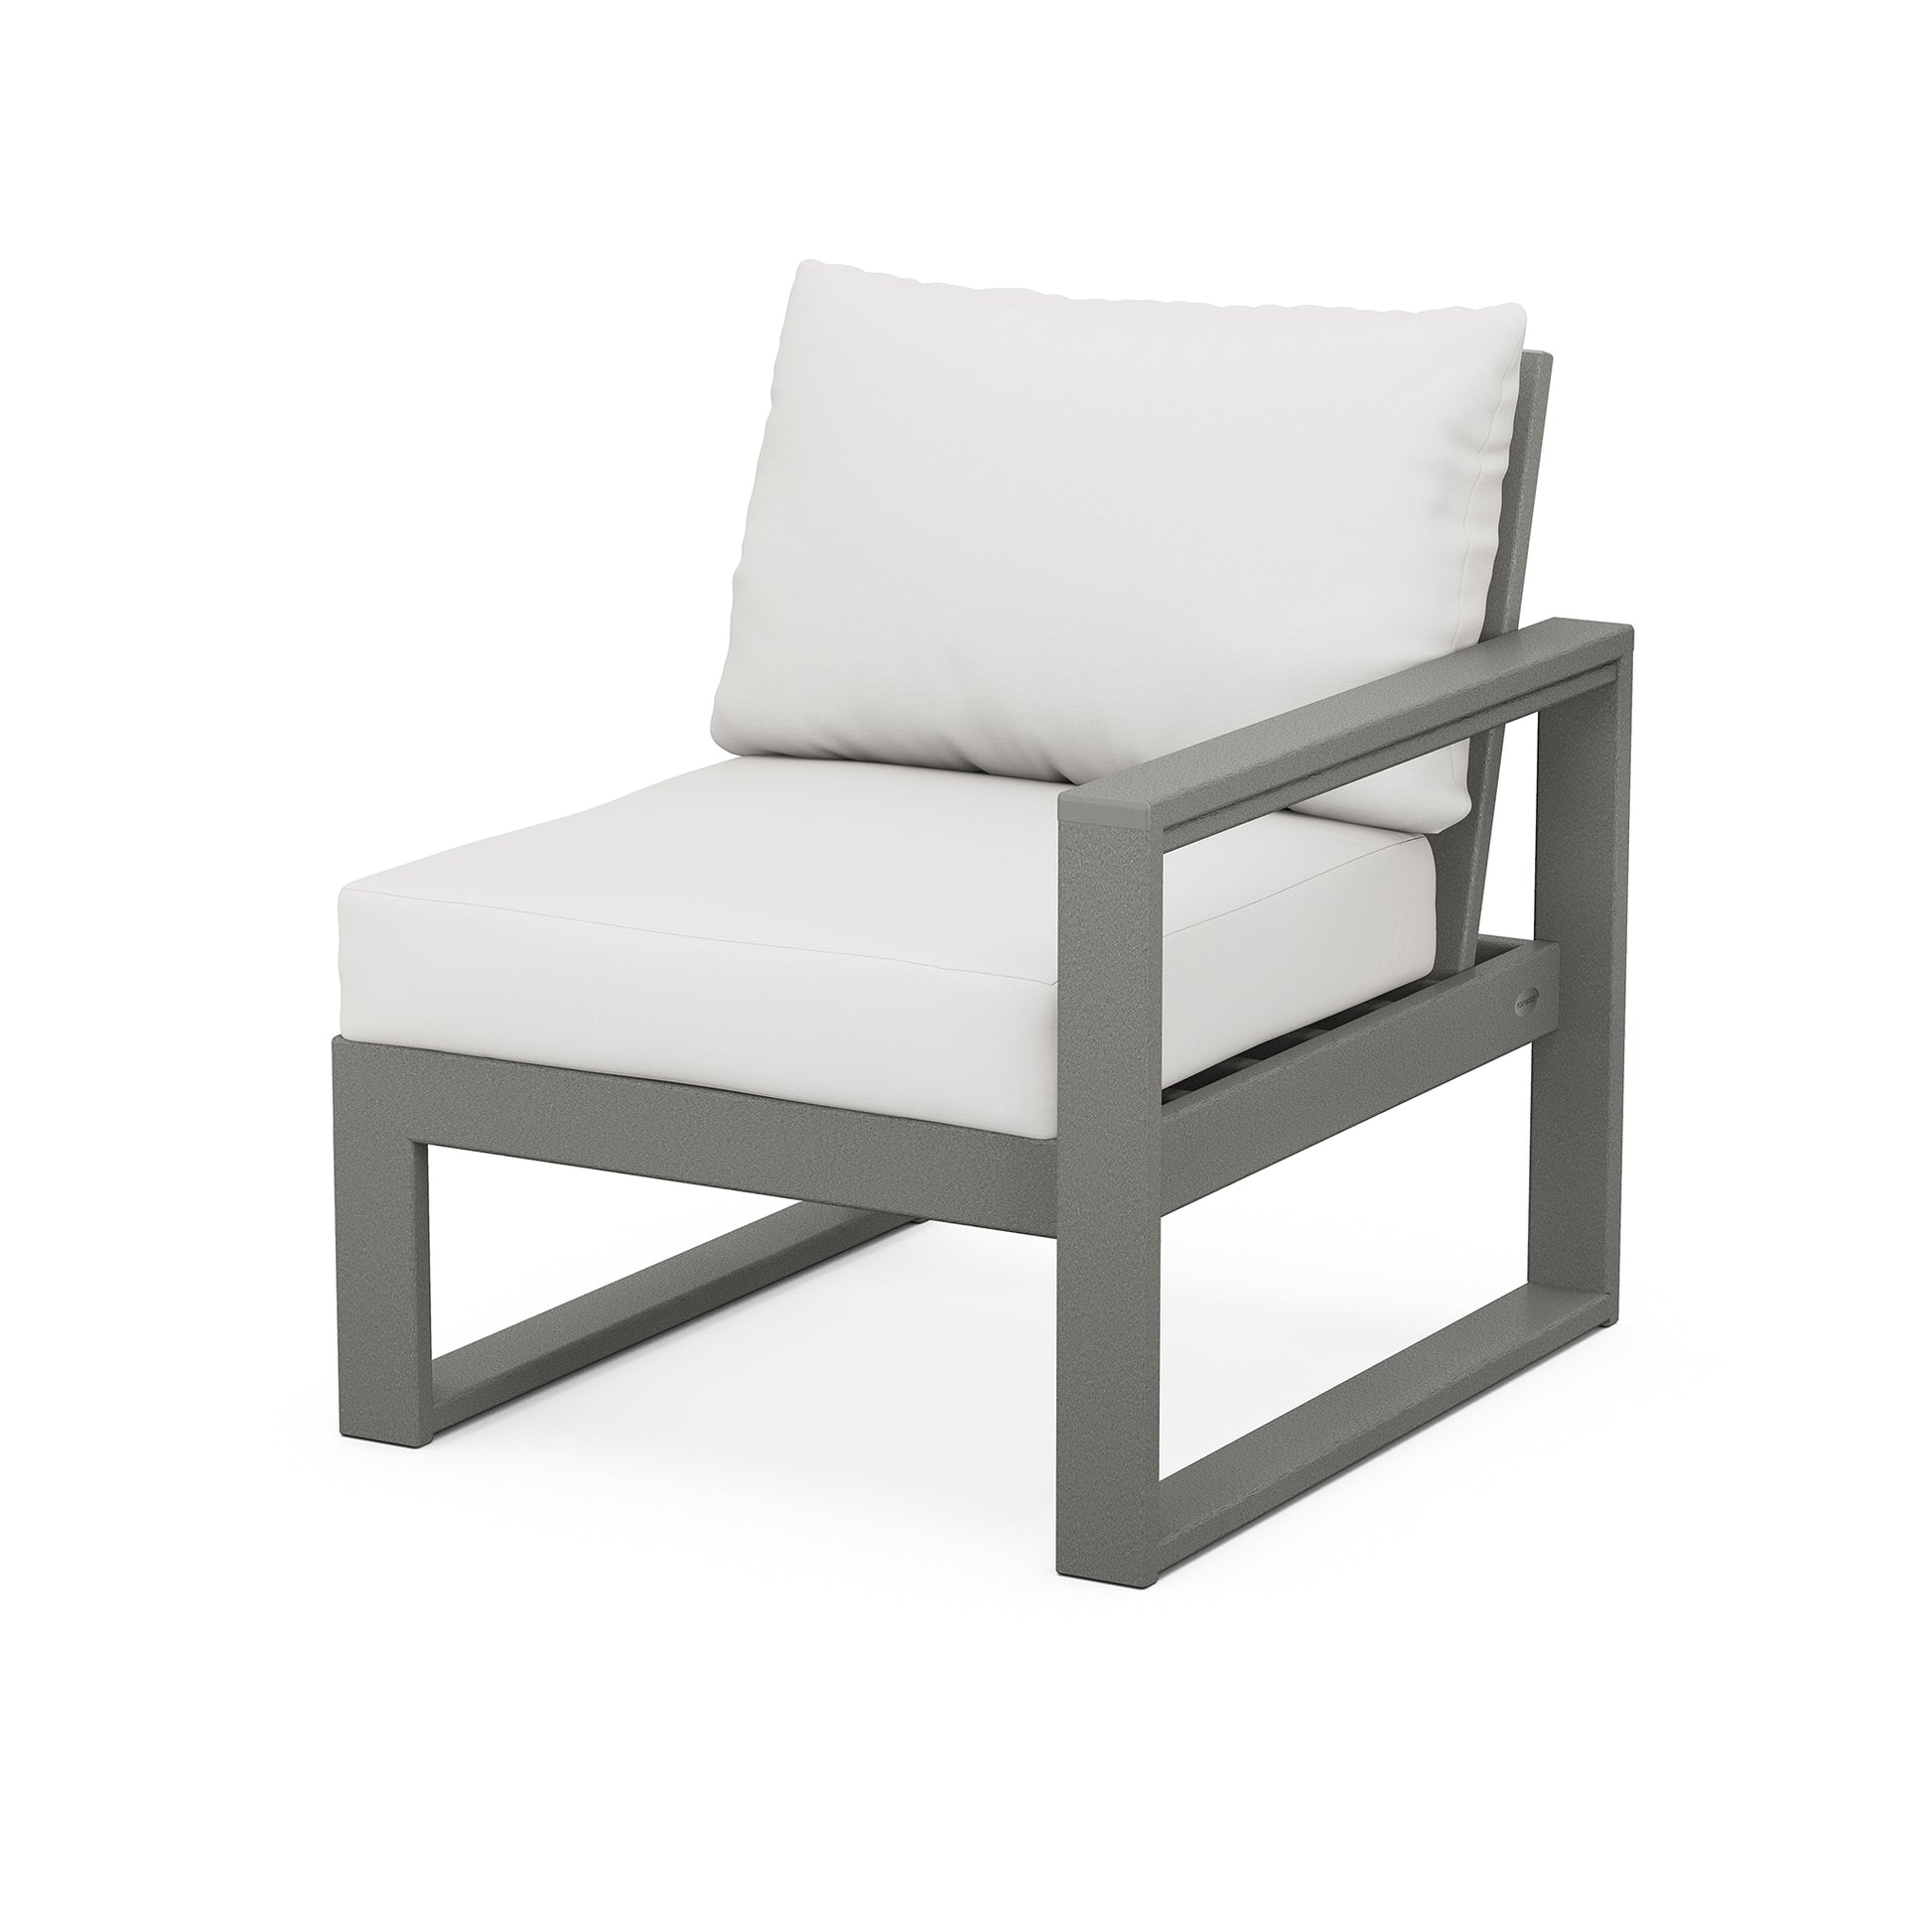 A POLYWOOD EDGE Modular Right Arm Chair with a dark gray aluminum frame and white cushions, featuring weather-resistant construction, isolated on a white background.